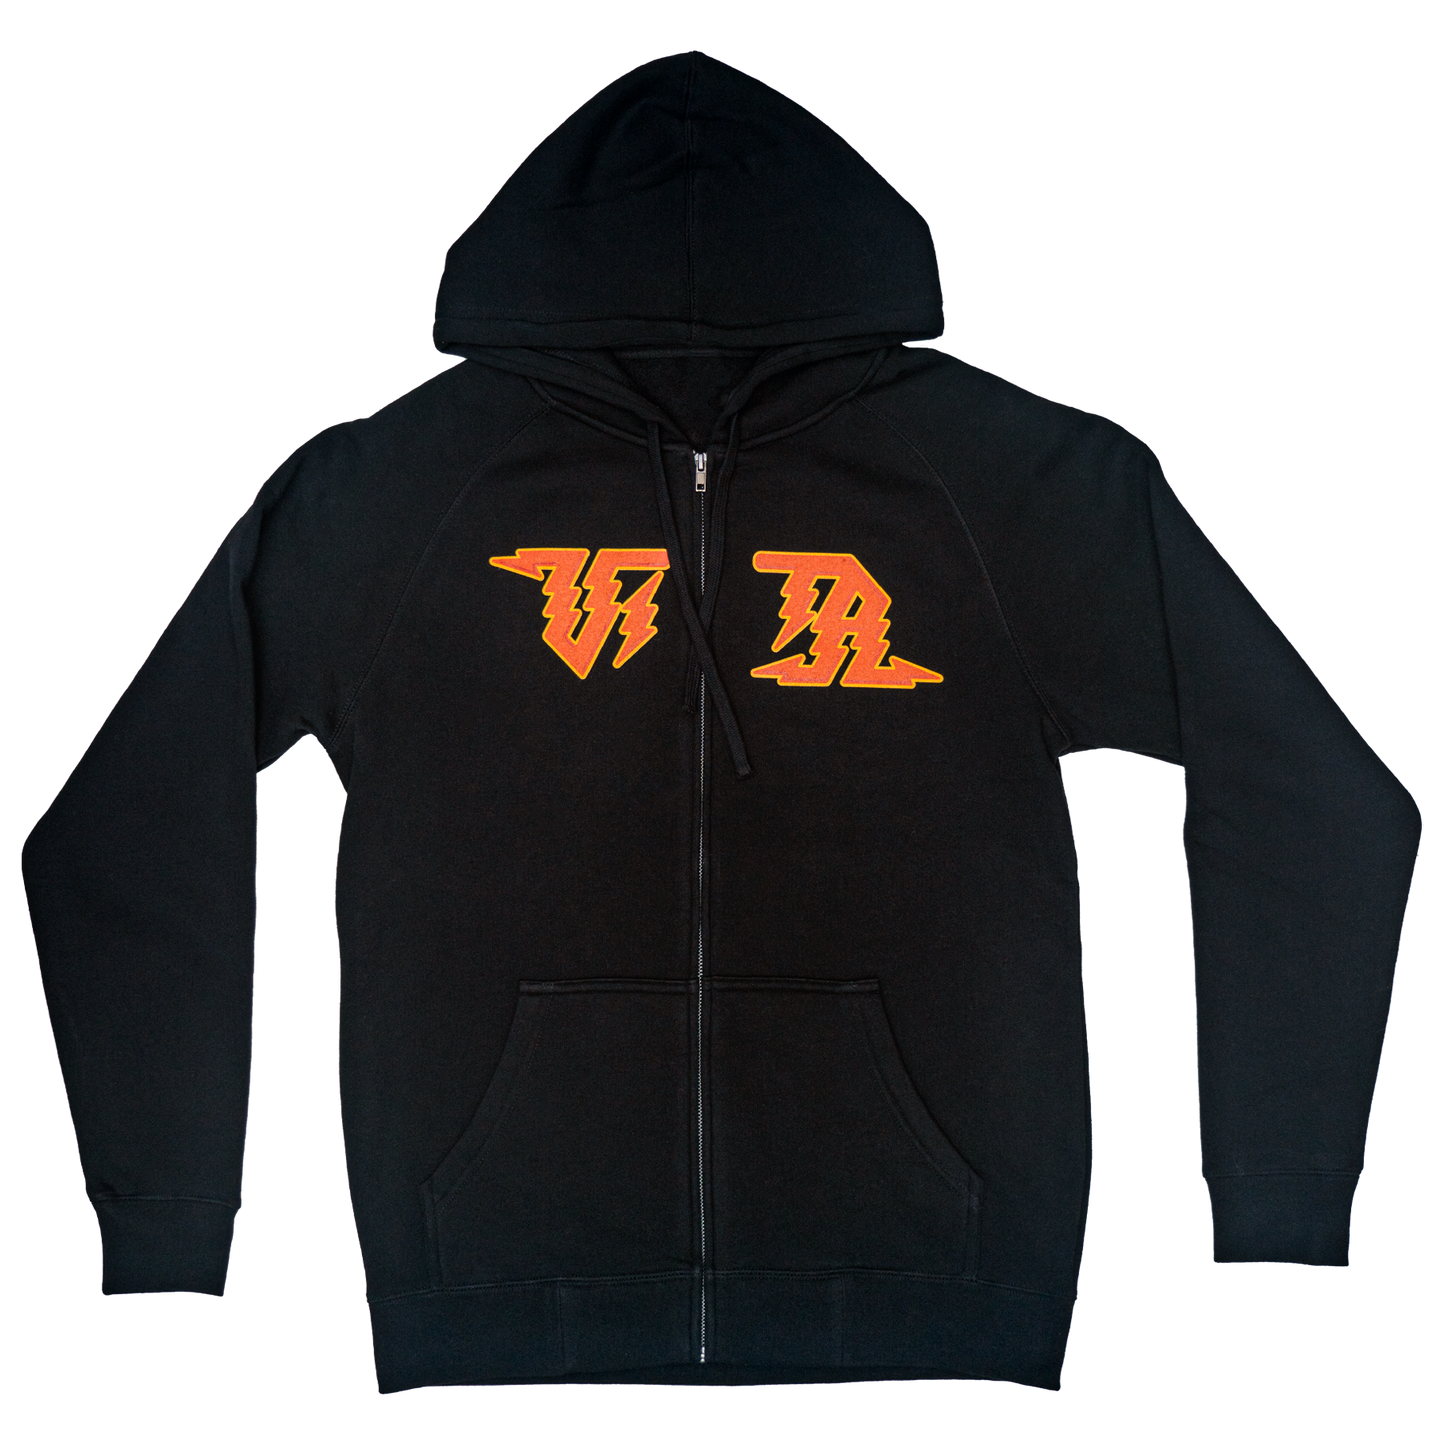 Product Image: front of hoodie with Vita logo and zipper.